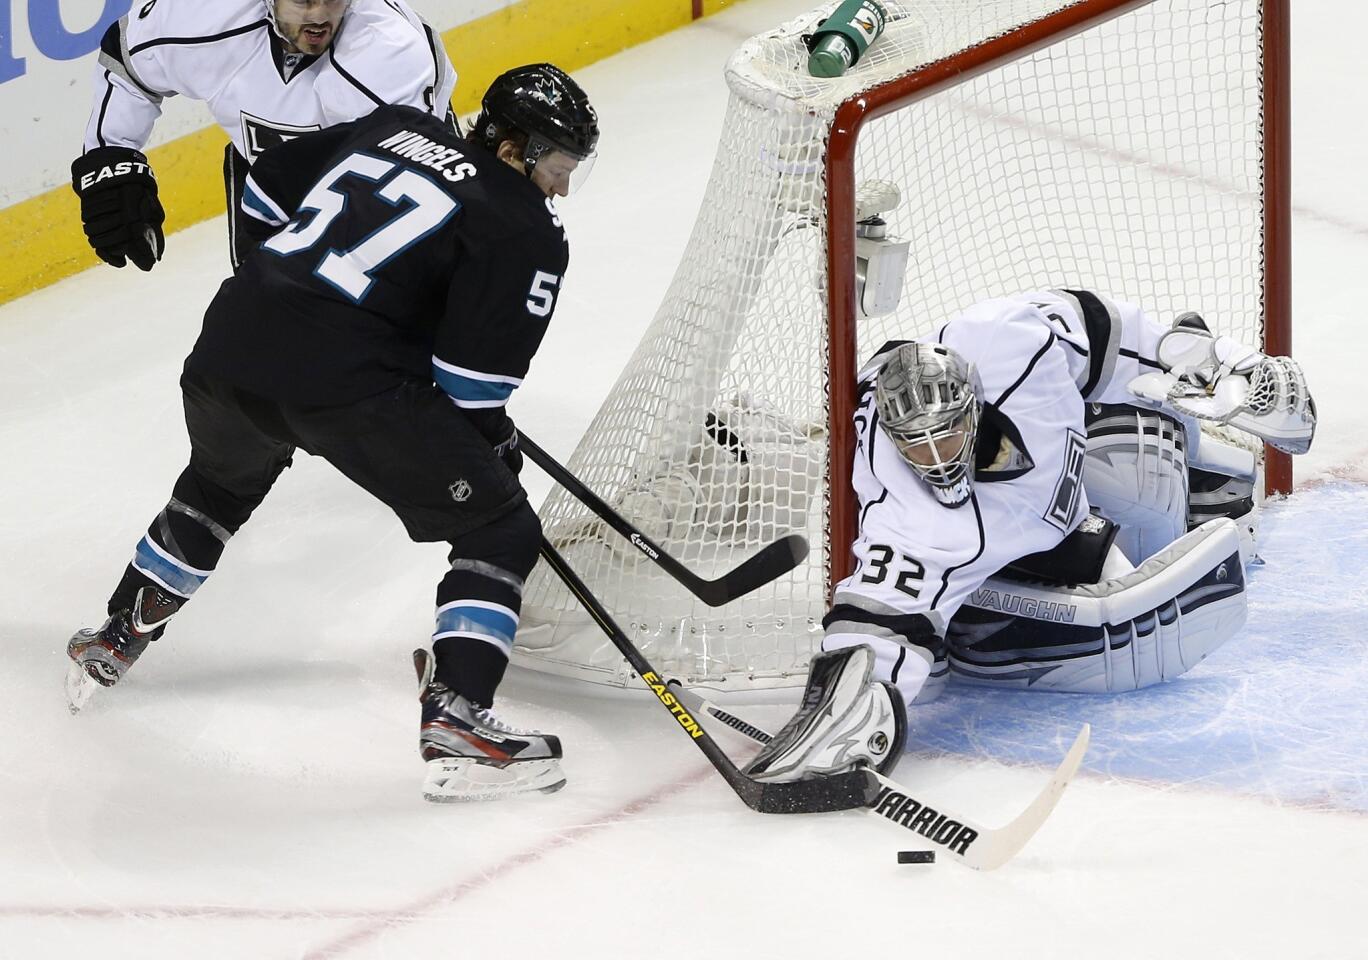 Sharks center Tommy Wingels has his point-blank shot stopped by Kings goaltender Jonathan Quick in the second period of Game 3 on Saturday night at HP Pavilion in San Jose.